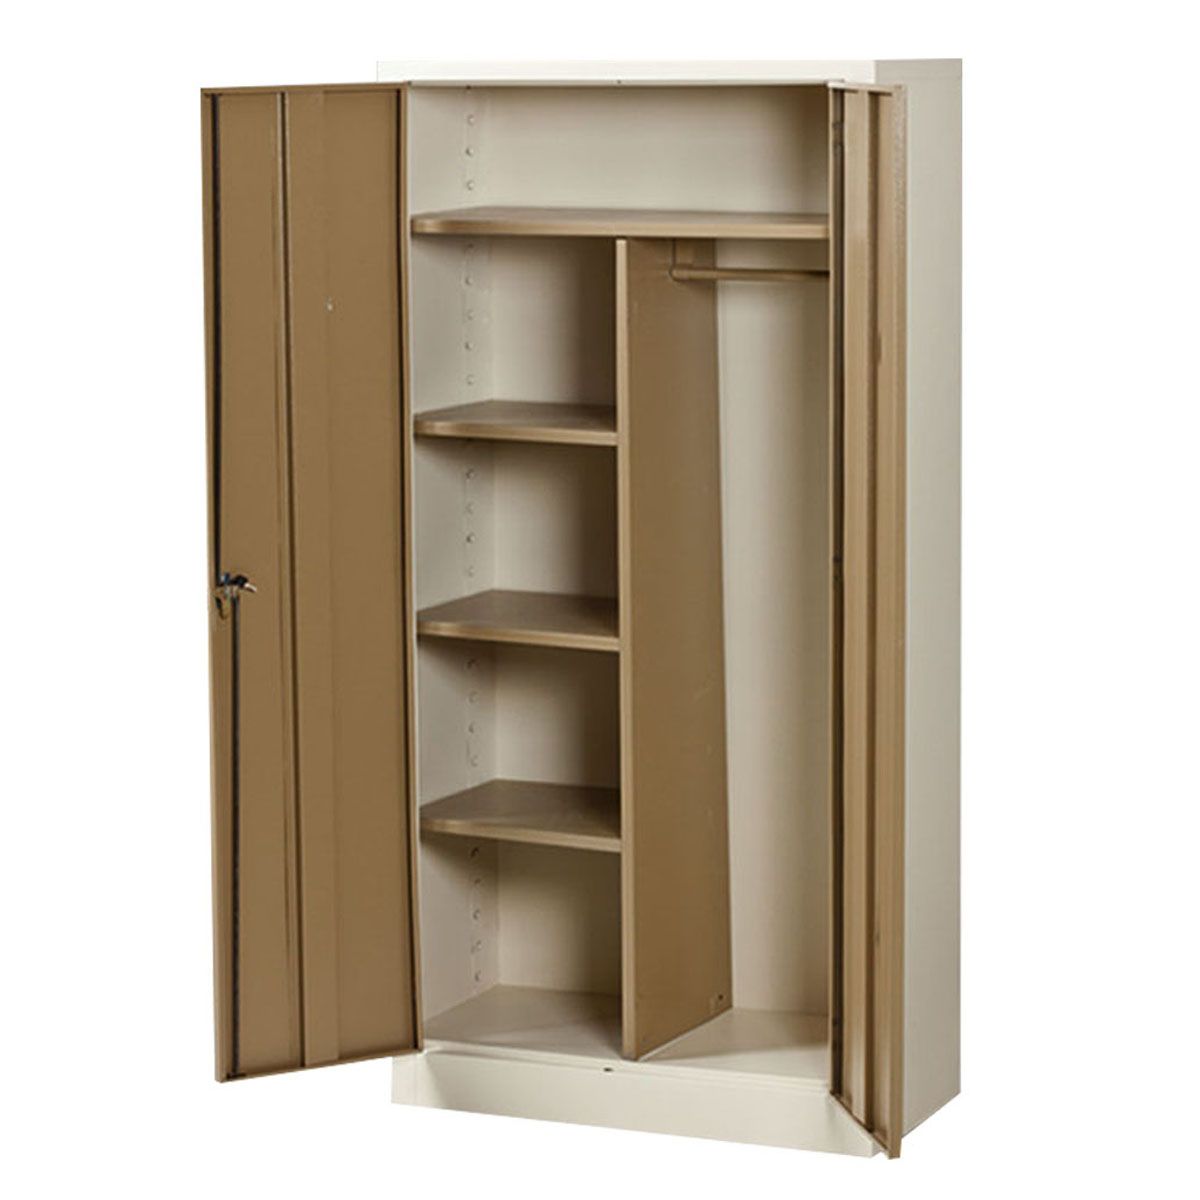 Popular Heavy Duty Wardrobes For Heavy Duty Steel Gents Wardrobe. Shop Online And Save (View 3 of 10)